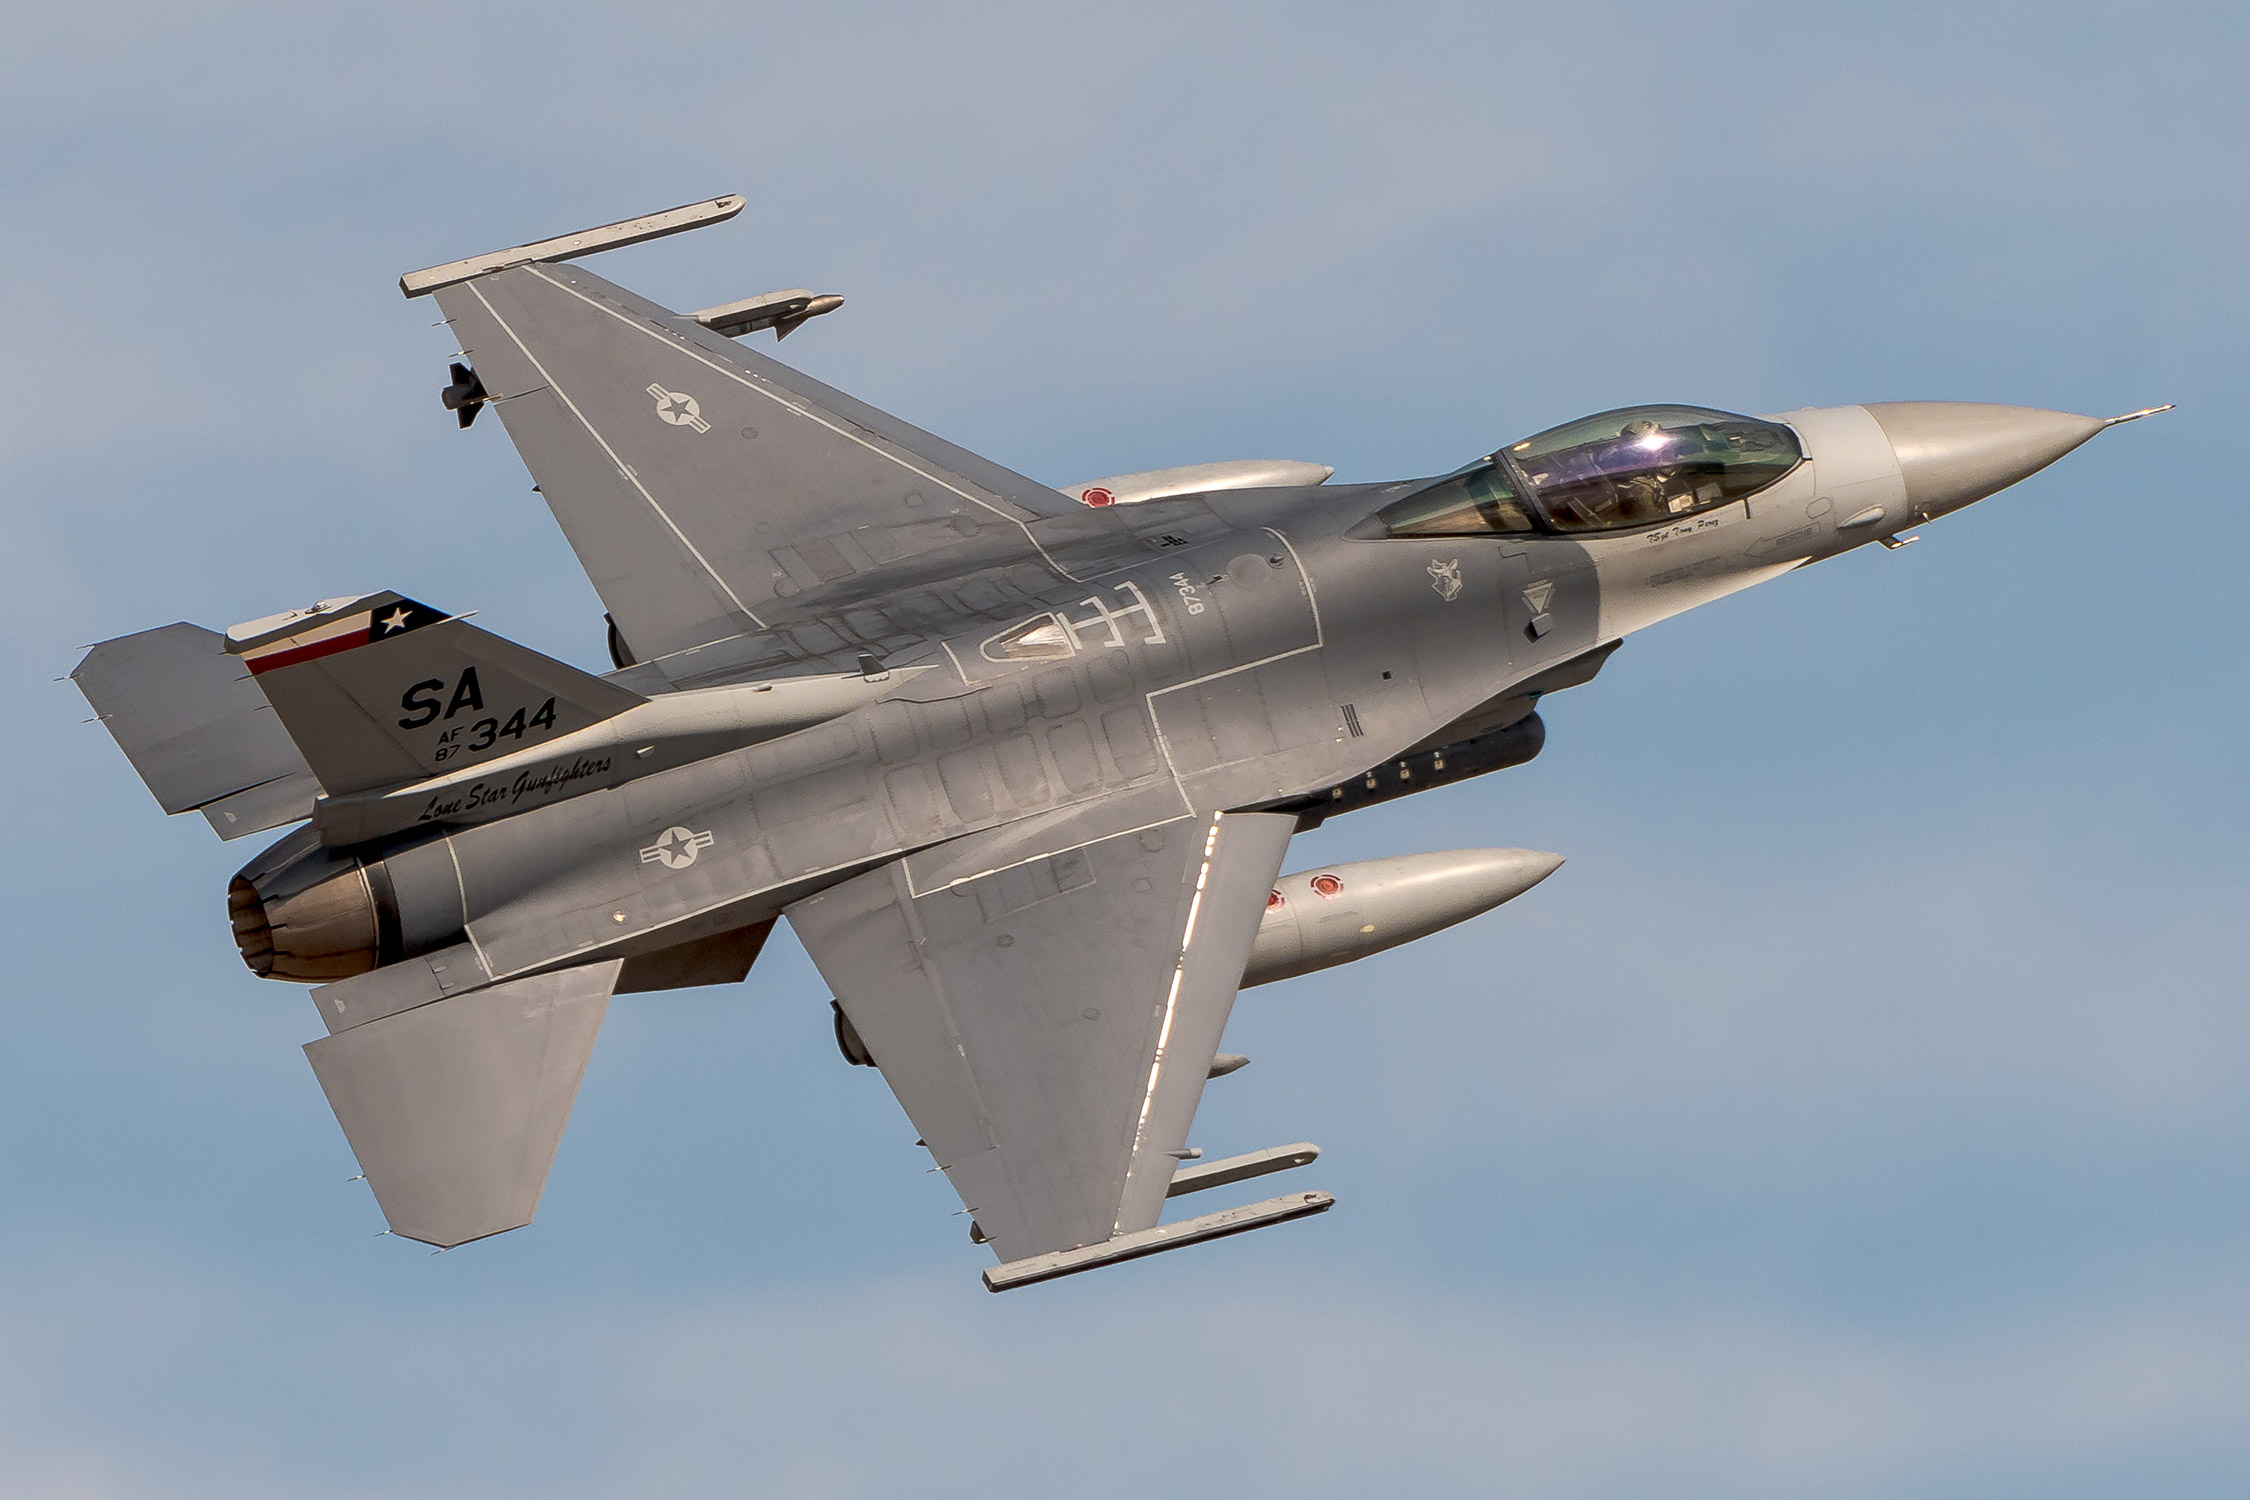 US Air Force F16 fighter jet crashes in Germany